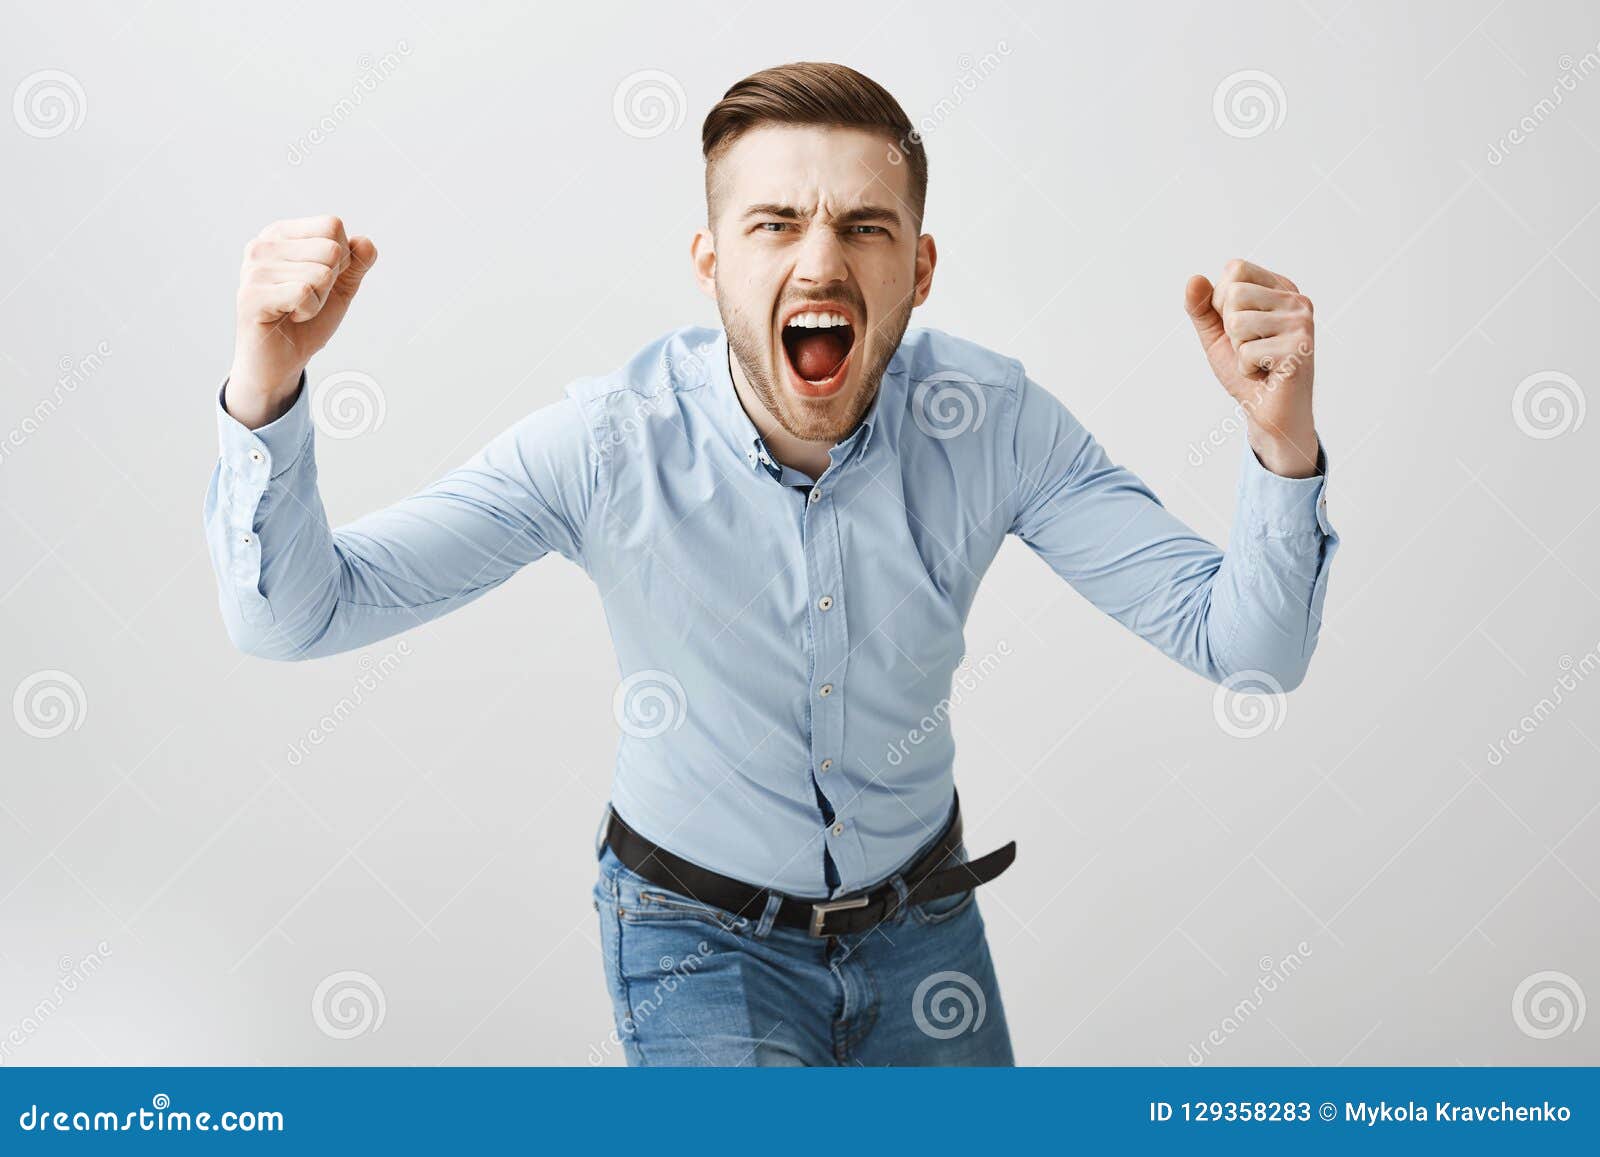 emotive thrilled concerned european male boss in formal blue shirt and jeans bending towards camera yelling and raising